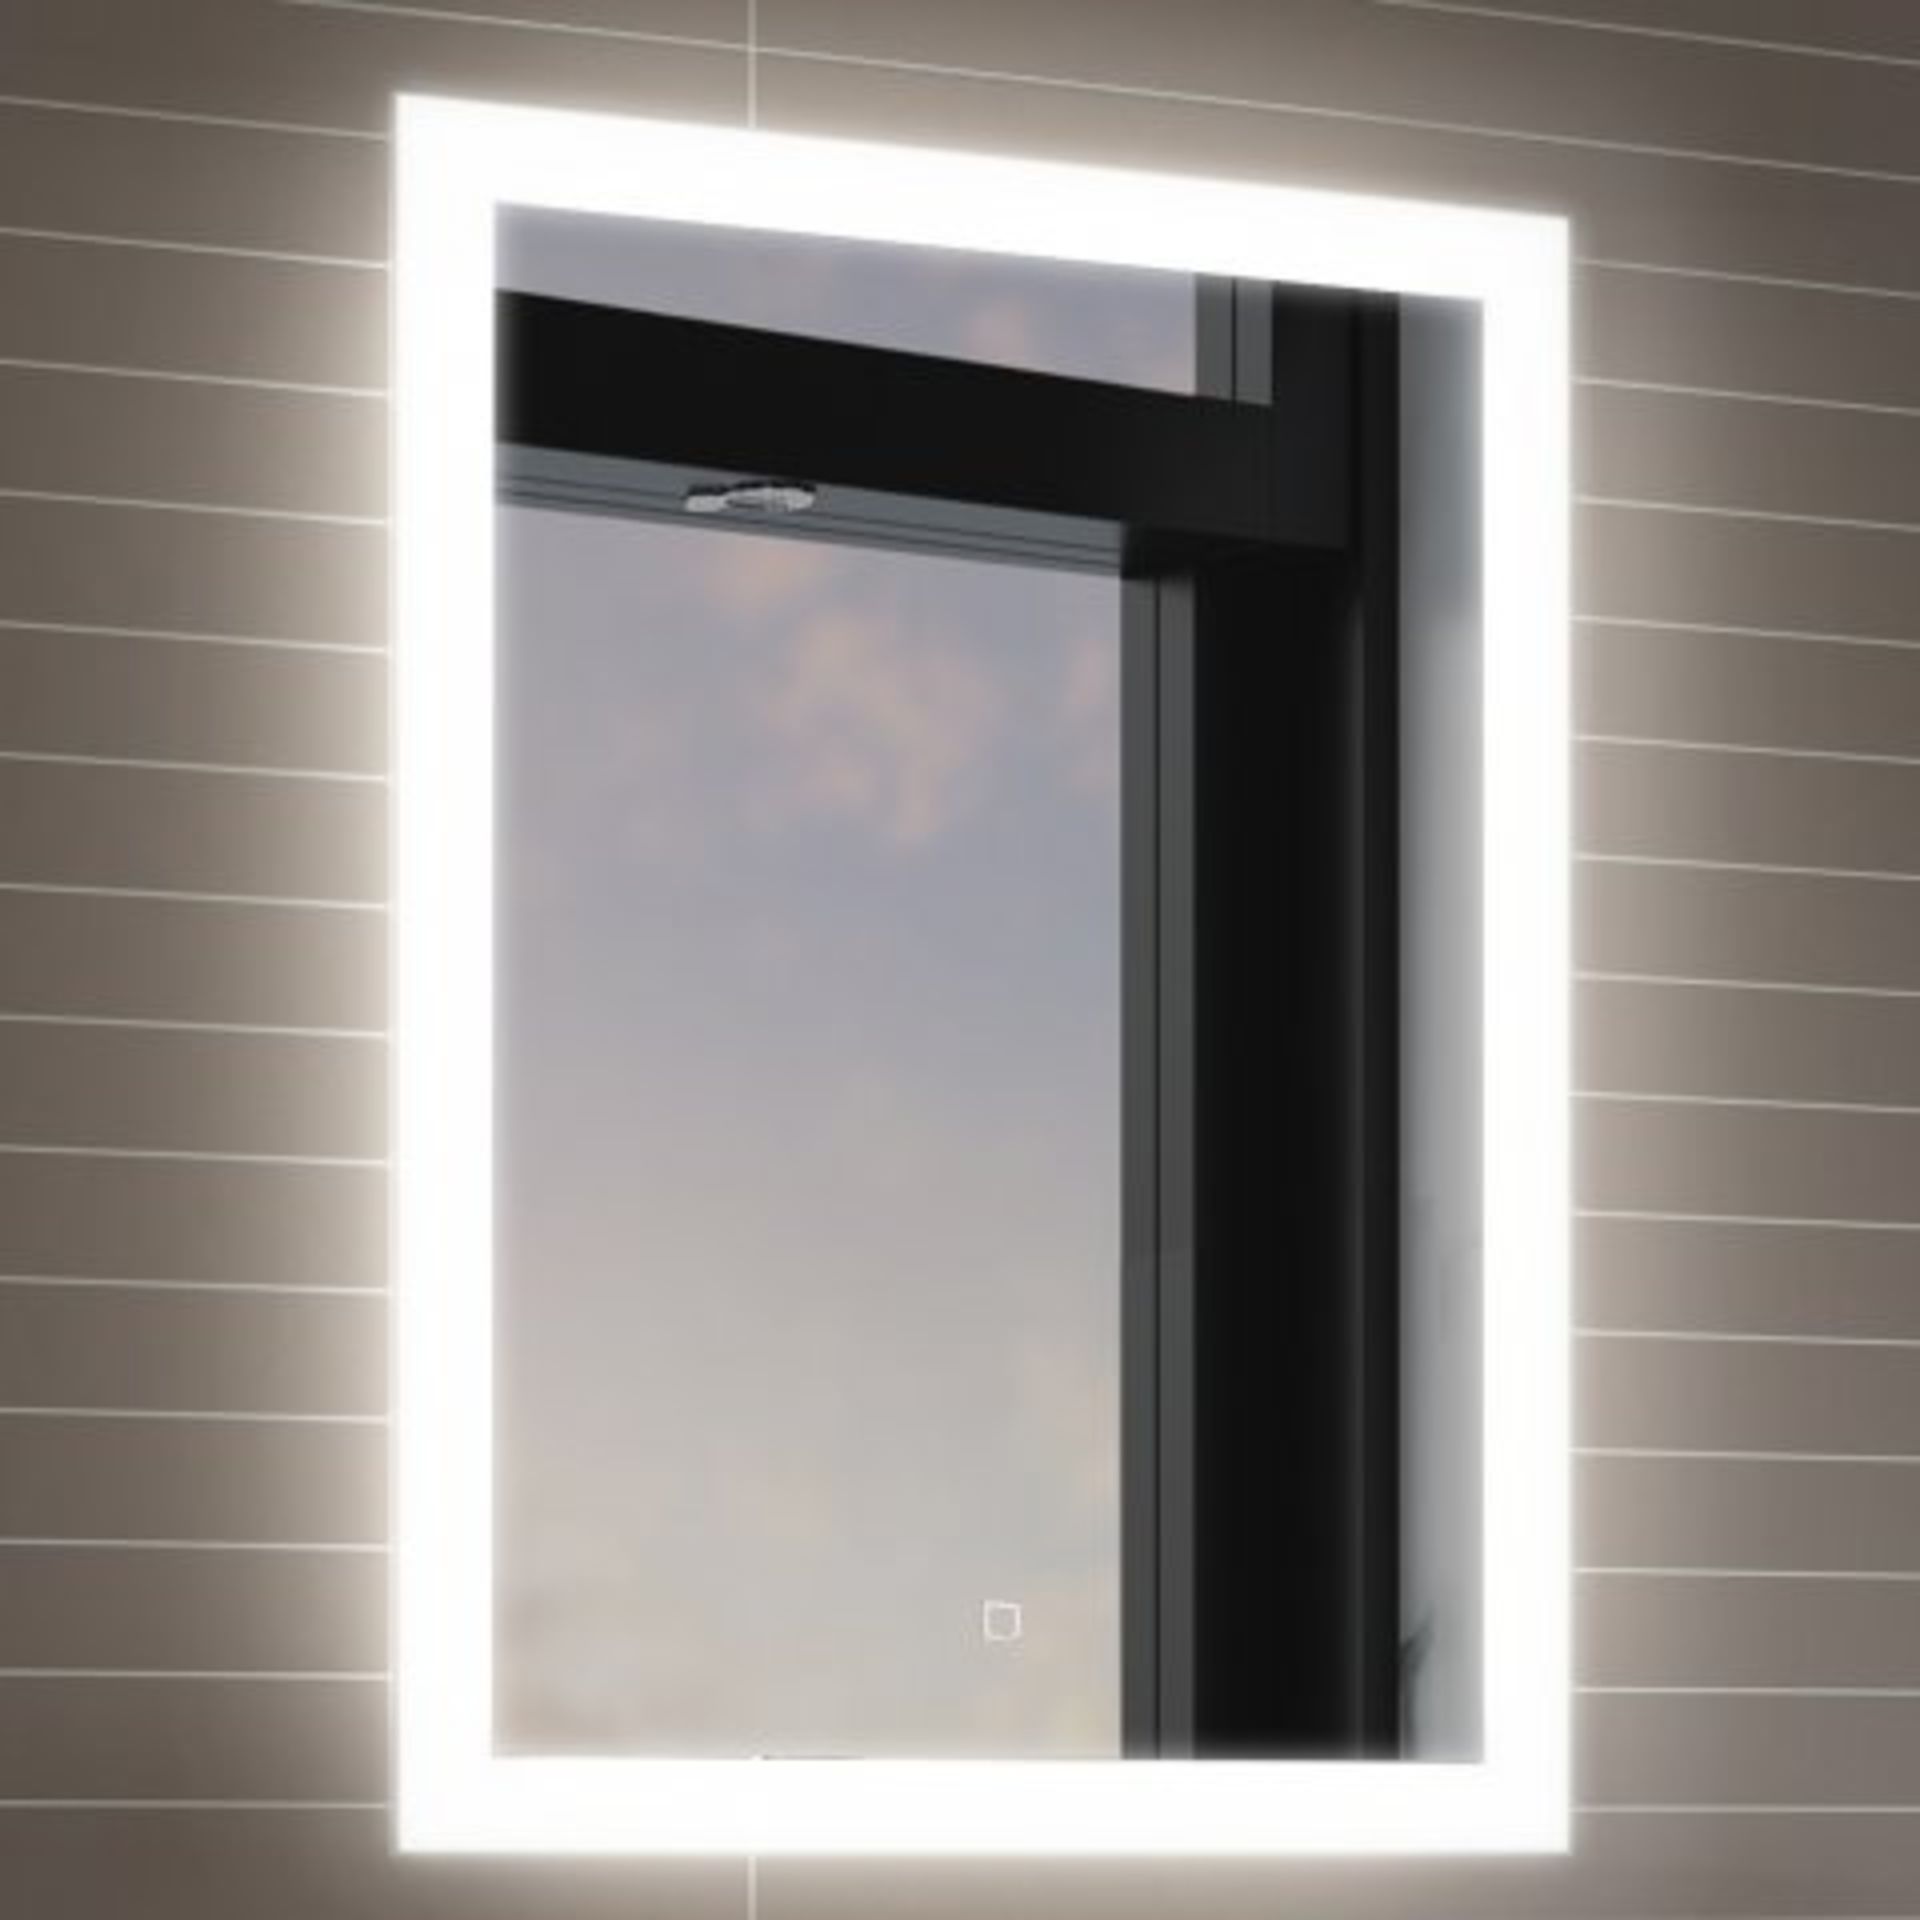 (H128) 700x500mm Orion Illuminated LED Mirror - Switch. RRP £349.99, Light up your bathroom with our